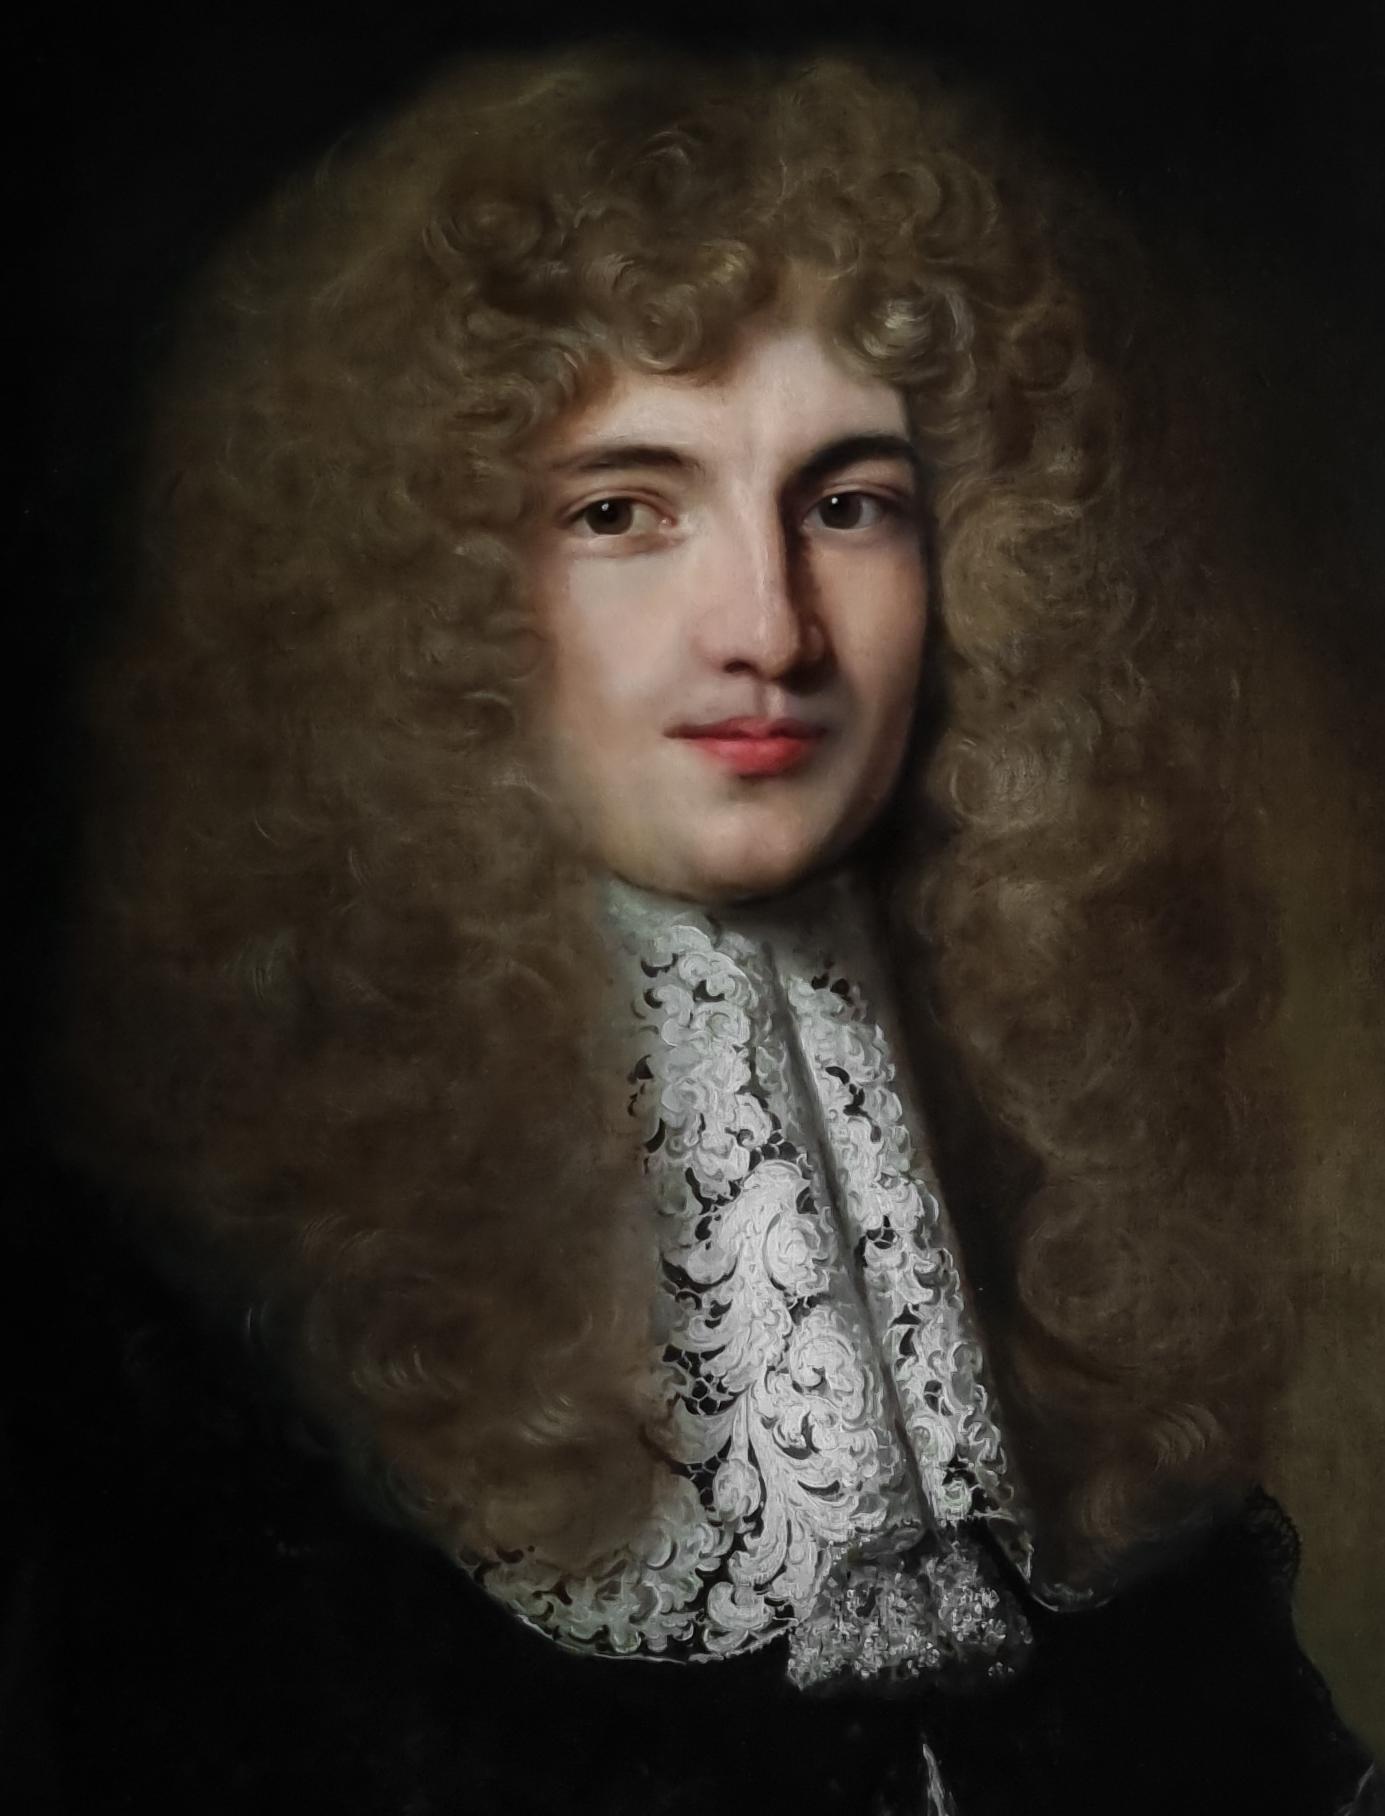 Portrait Painting of a Gentleman with a Black Coat and Elaborate Lace Collar - Old Masters Art by Ferdinand Voet known as 